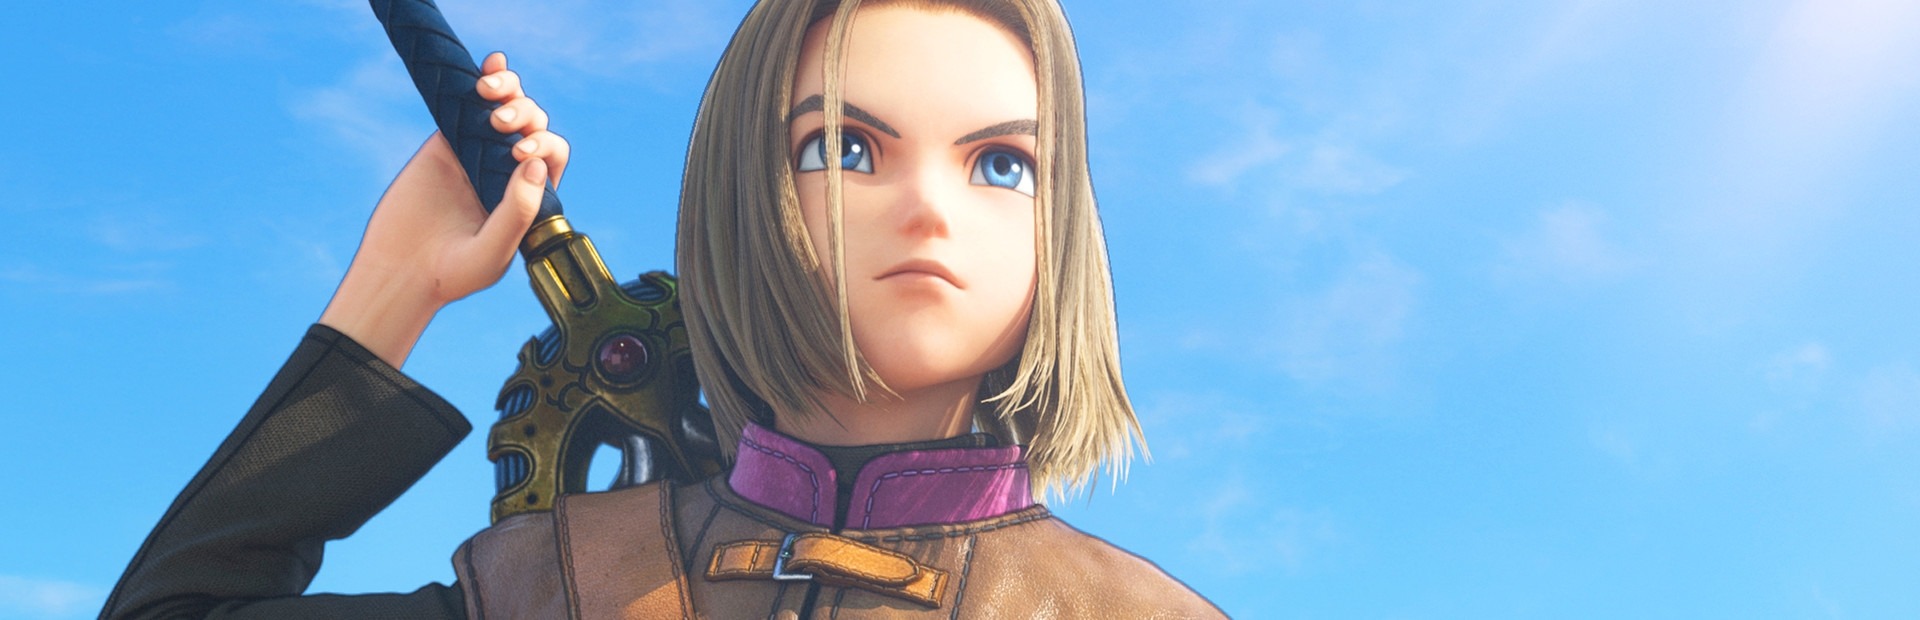 Dragon Quest XI S: Echoes of an Elusive Age – Definitive Edition Switch